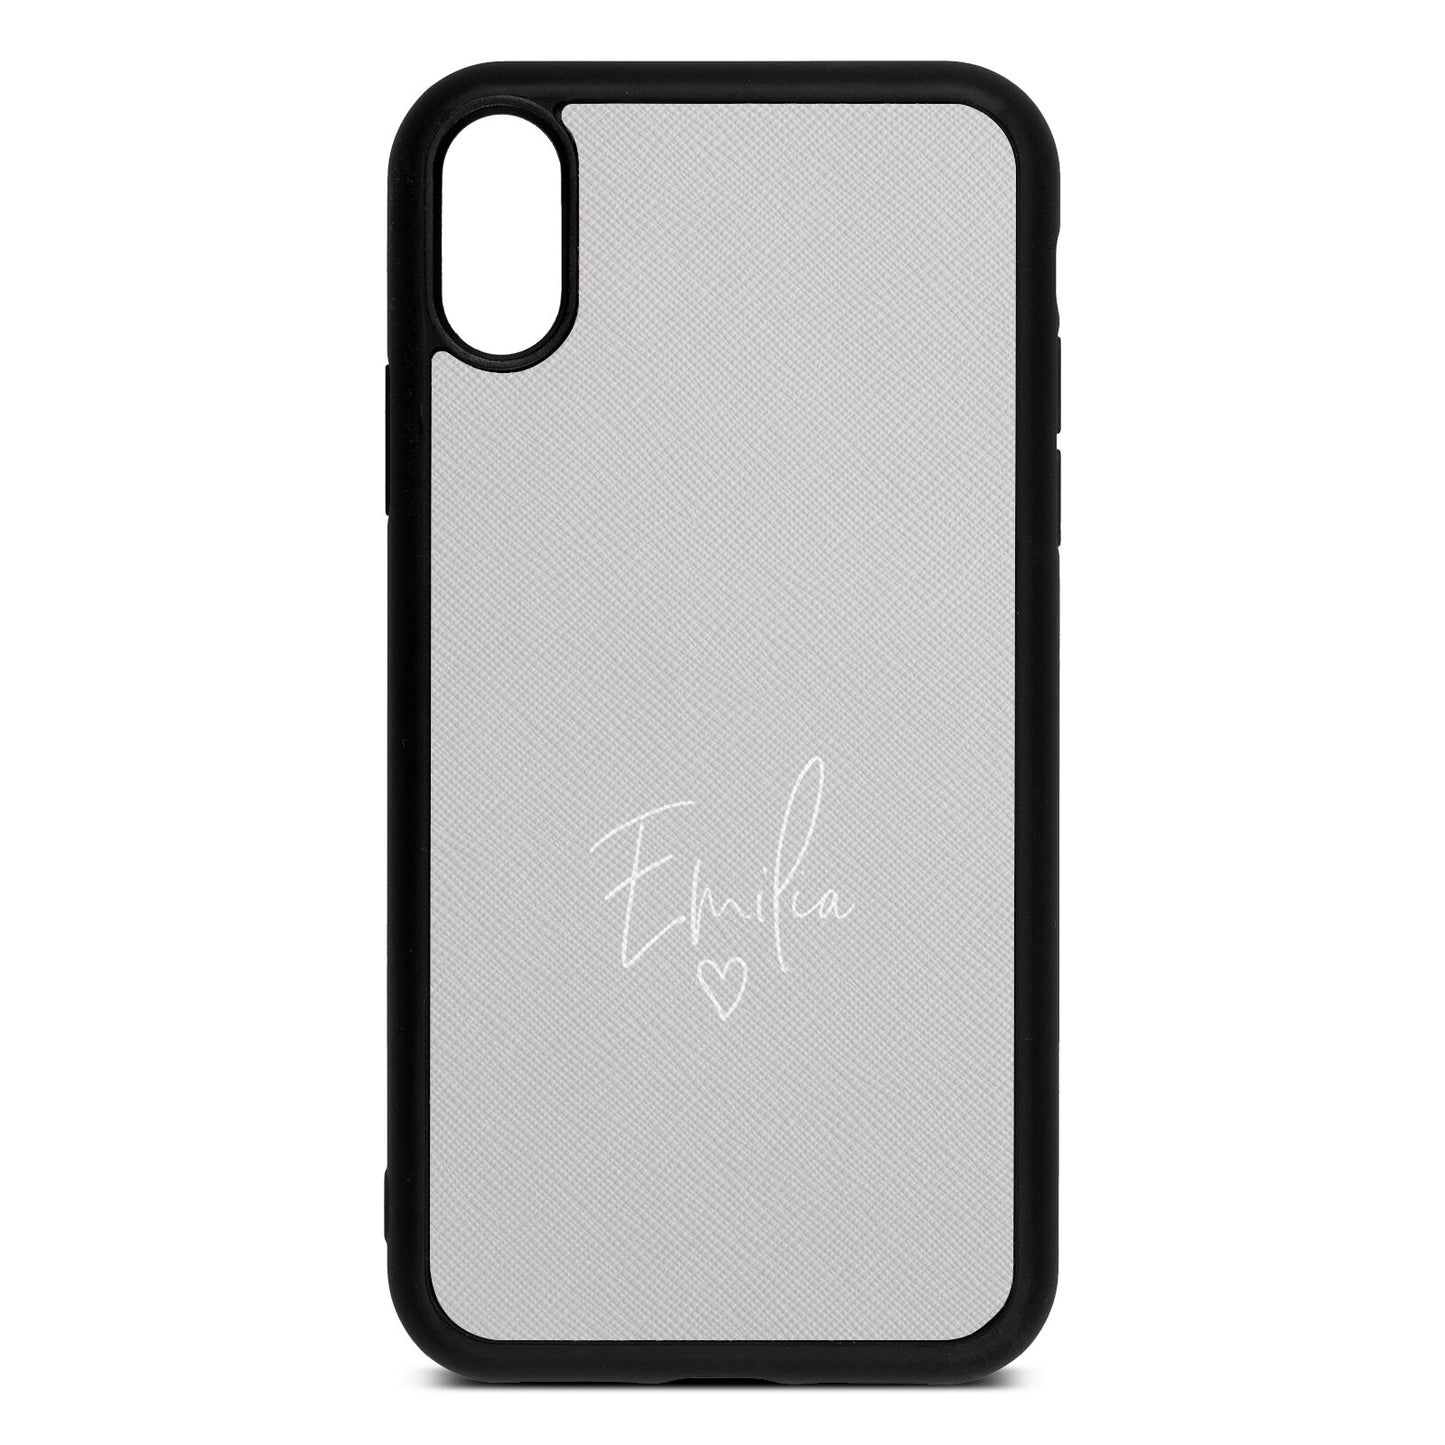 White Handwritten Name Transparent Silver Saffiano Leather iPhone Xr Case